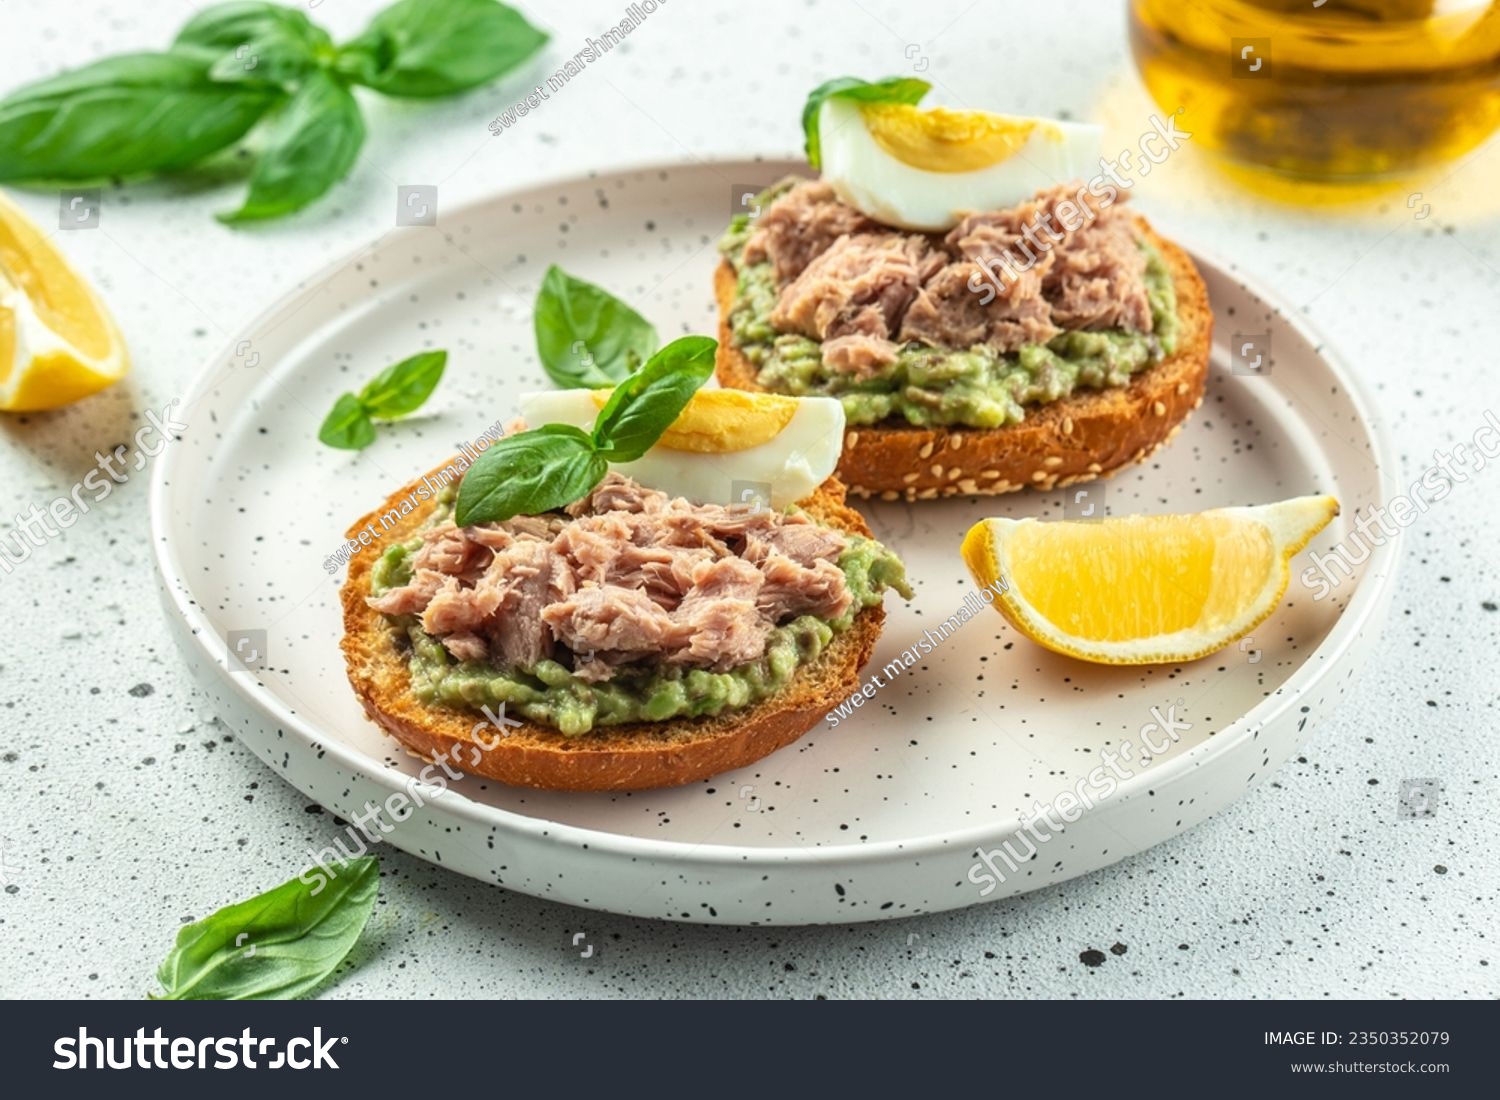 sandwiches with canned tuna, boiled egg and avocado. Food recipe background. Close up. #2350352079